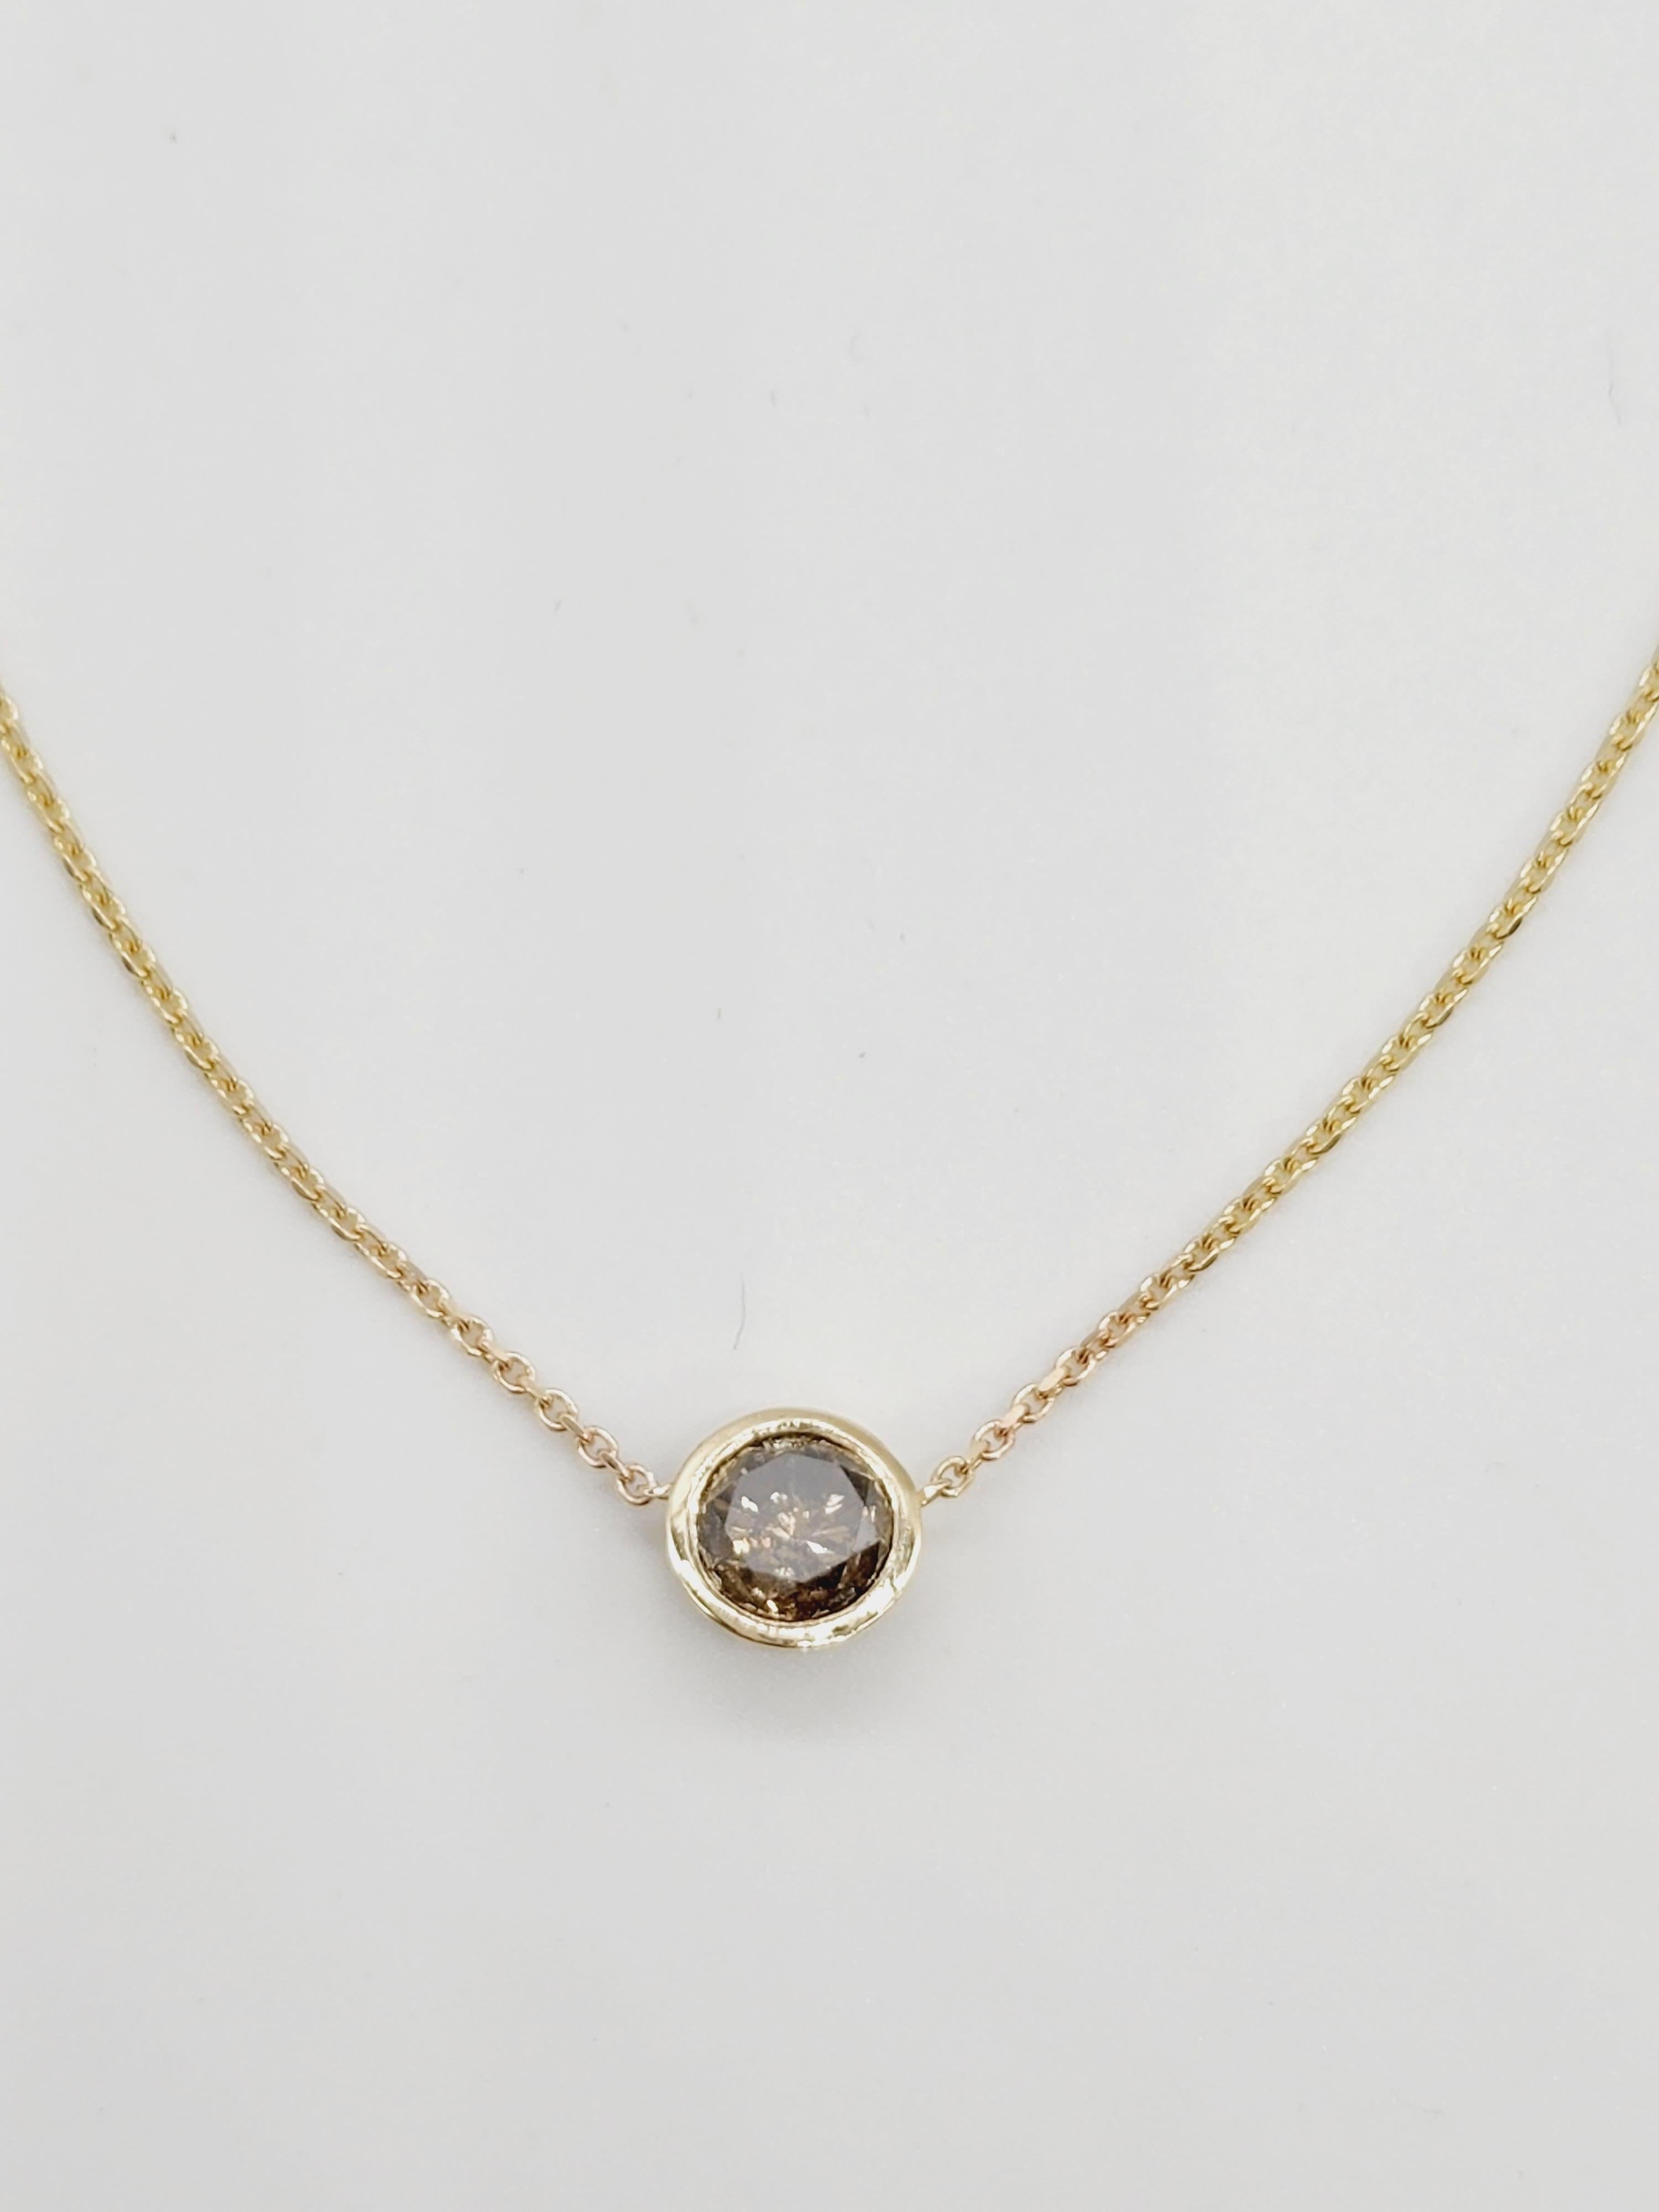 GIA 1.13 Carat Round Fancy Diamond Pendant 14 Karat Yellow Gold In New Condition For Sale In Great Neck, NY